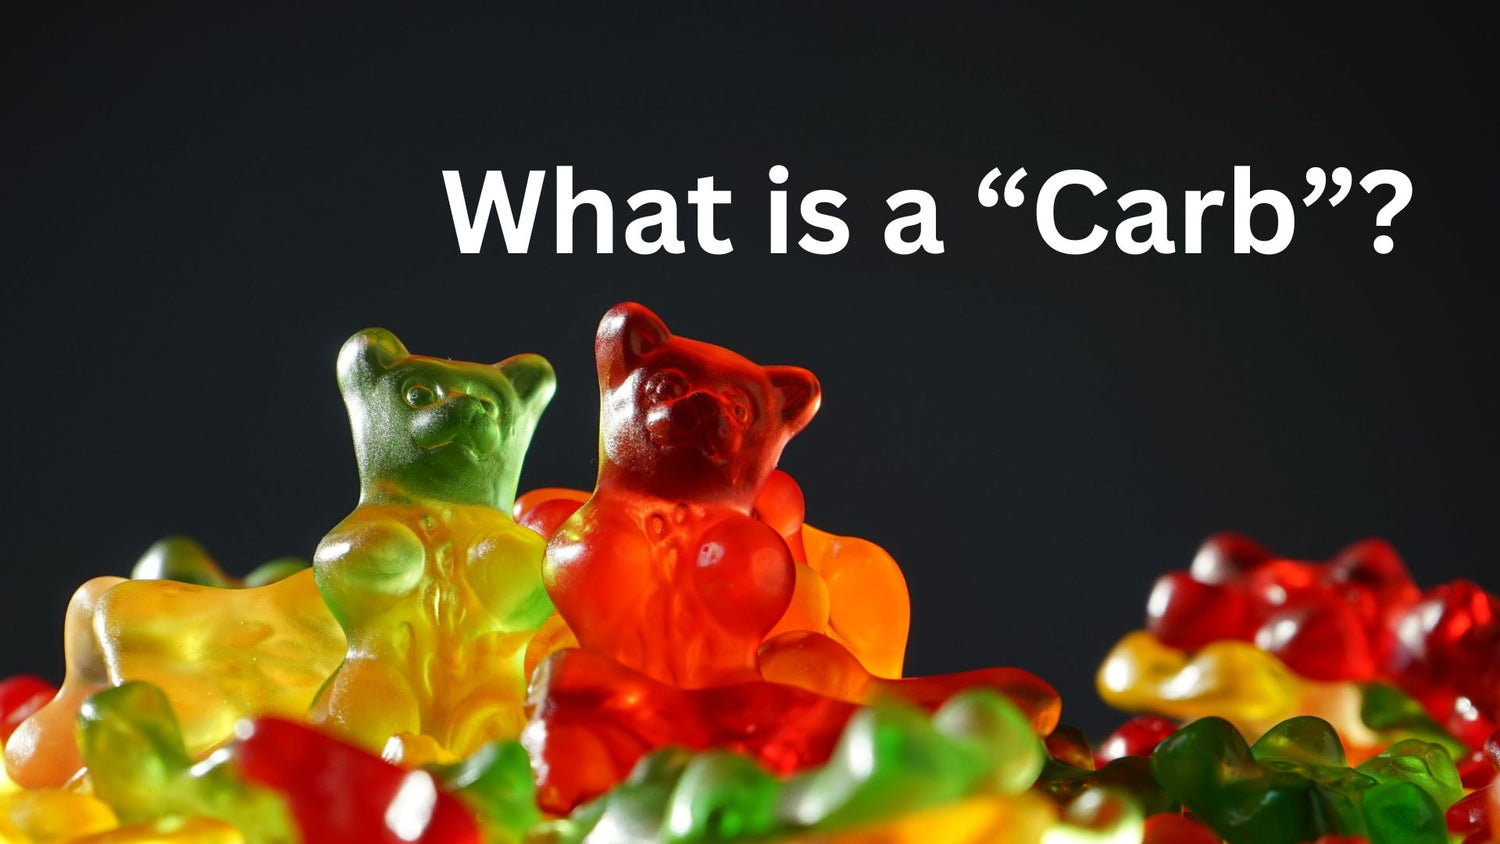 What is a "Carb"?